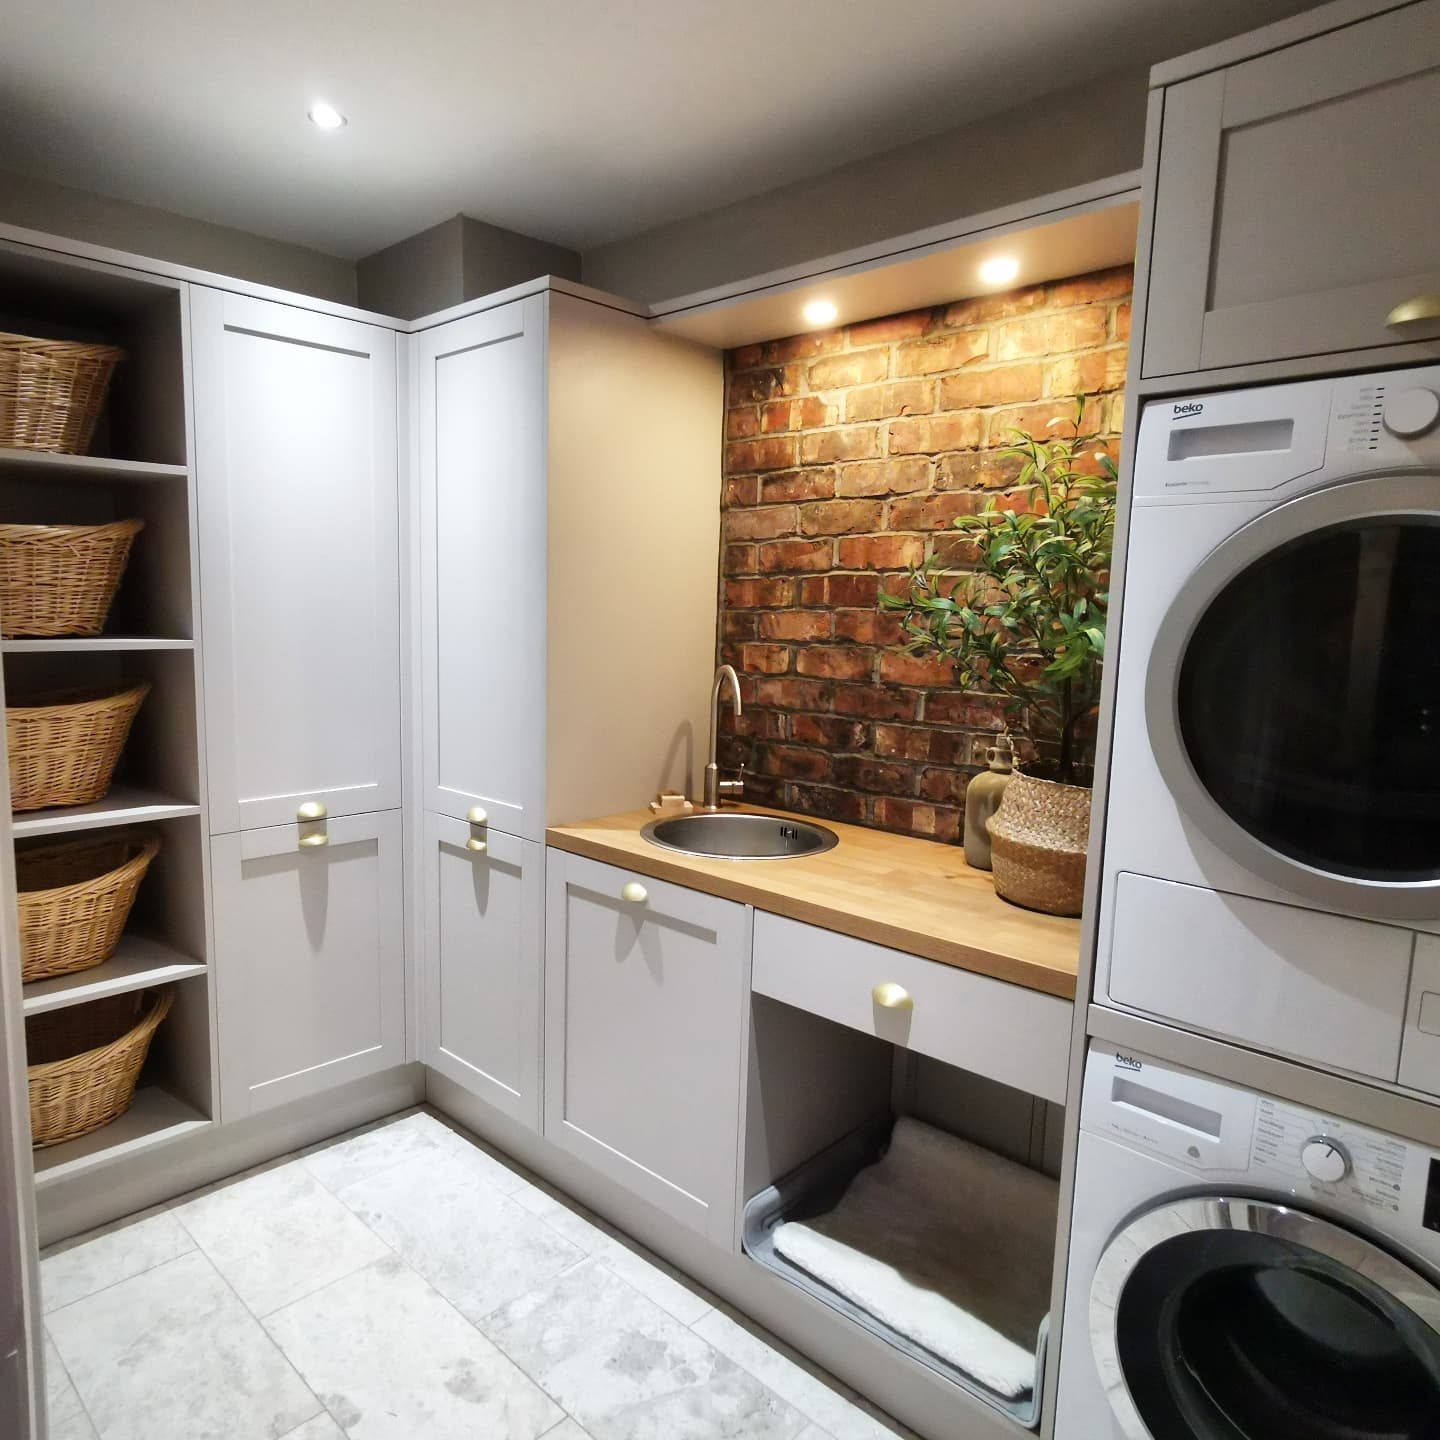 To Maximize Space in Your Long Narrow Laundry Room start by decluttering and add clever storage options wherever possible to utilize any unused spaces.